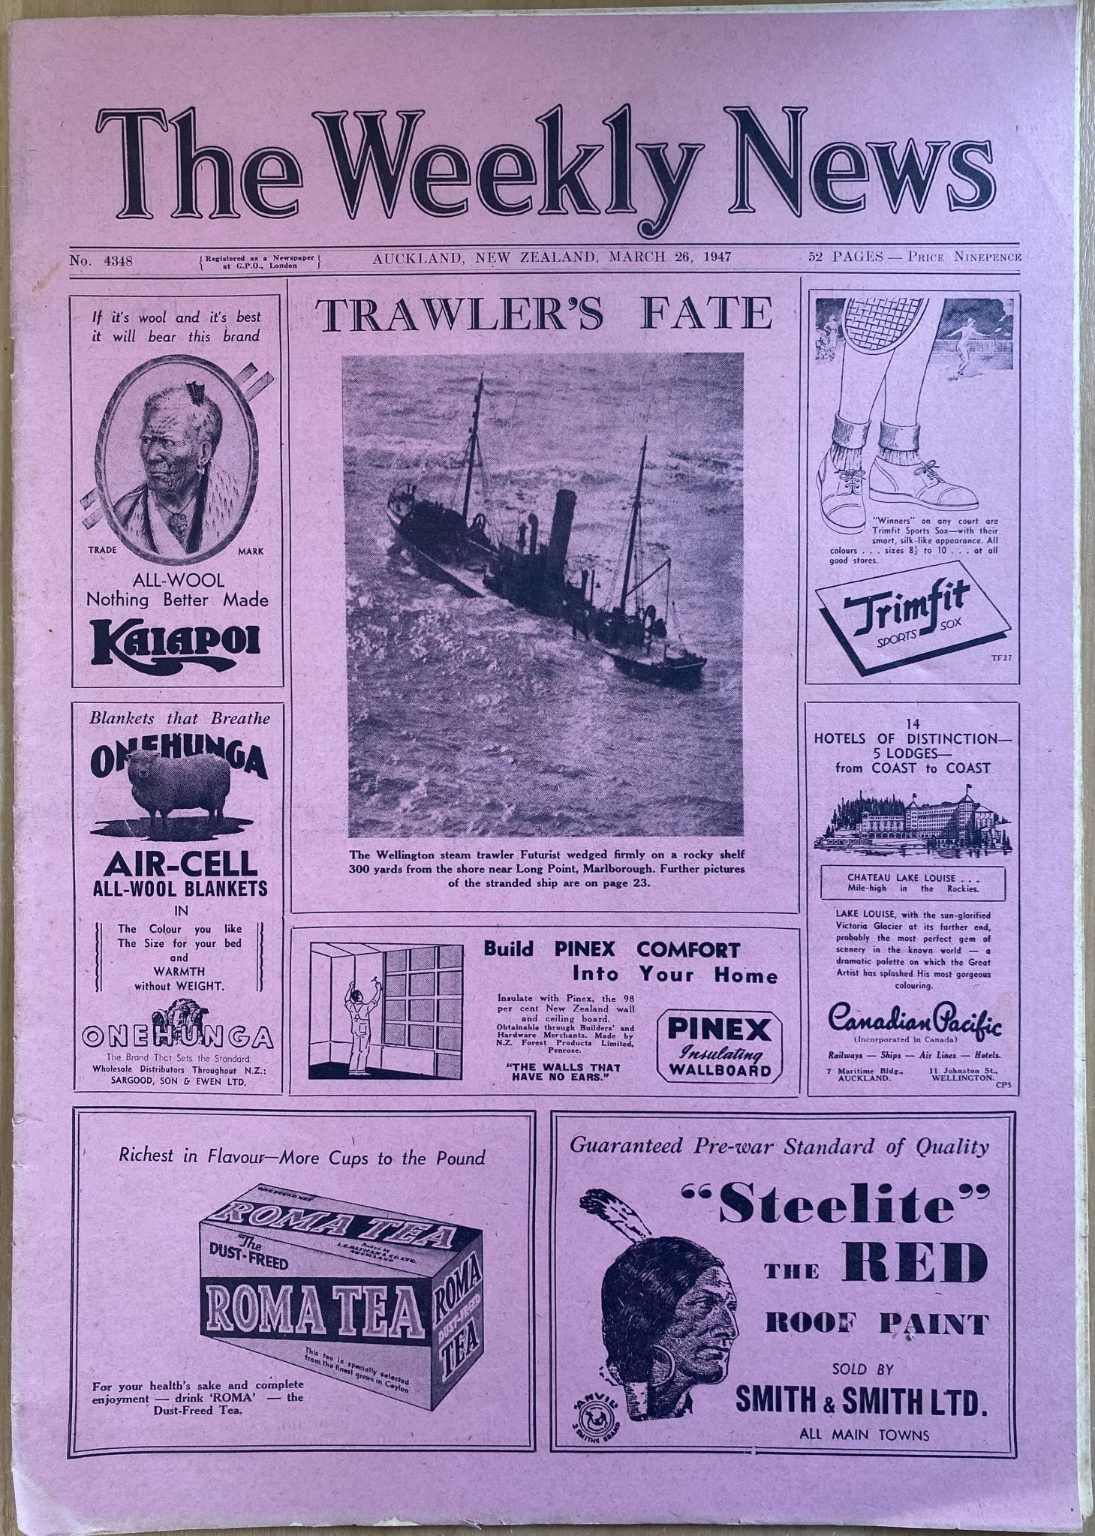 OLD NEWSPAPER: The Weekly News, No. 4348, 26 March 1947